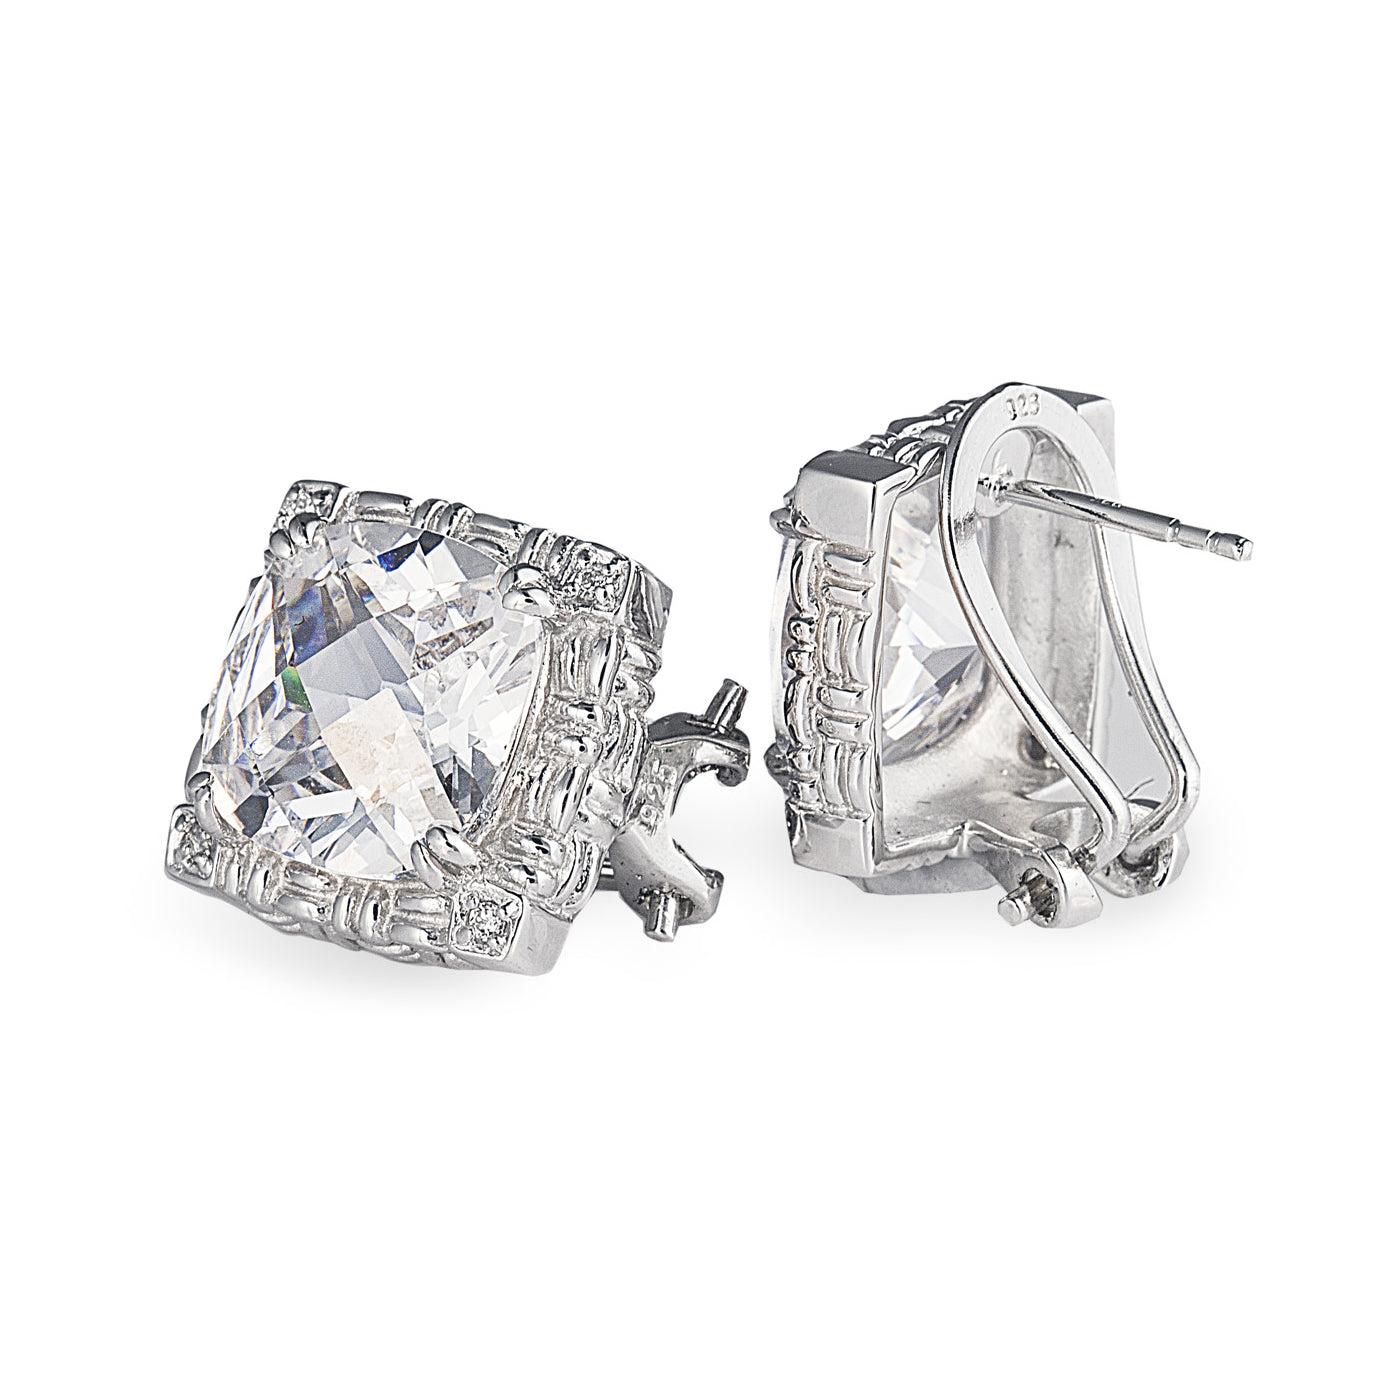 Parisian-inspired Regina Stud Earrings in 925 sterling silver with a large 'princess cut' cubic zirconia stone. Jewellery by Bellagio & Co. Worldwide shipping.